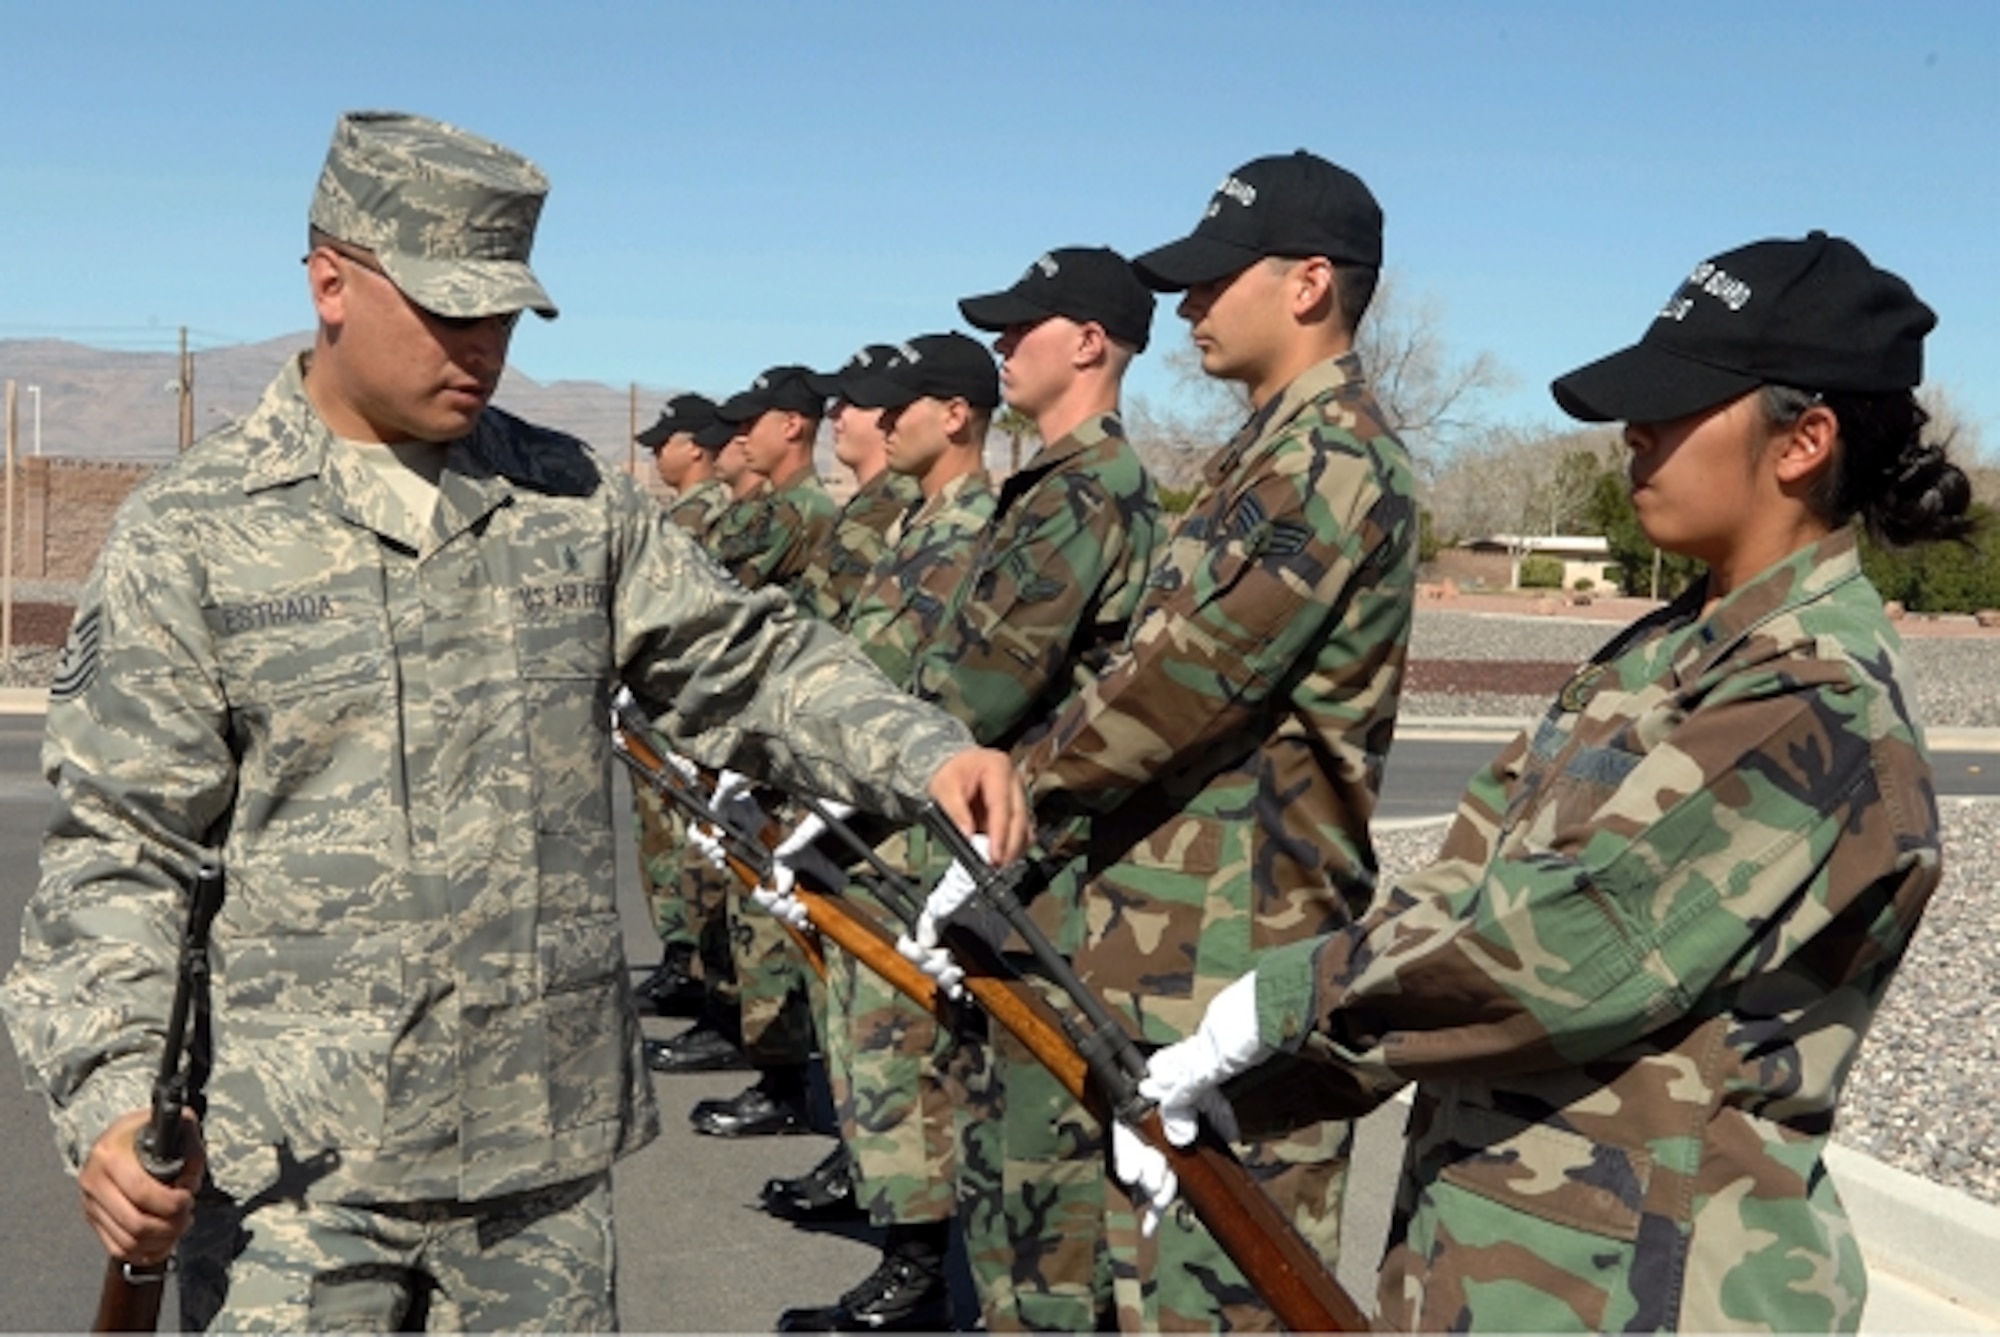 Tech Sgt. Jason Estrada, U.S. Air Force Honor Guard noncommissioned officer in charge of the Base Honor Guard Training Program, inspects base honor guardsmen's Ceremonial rifles at Nellis Air Force Base, Nev., during a recent training visit. (Photo courtesy of U.S. Air Force Honor Guard)